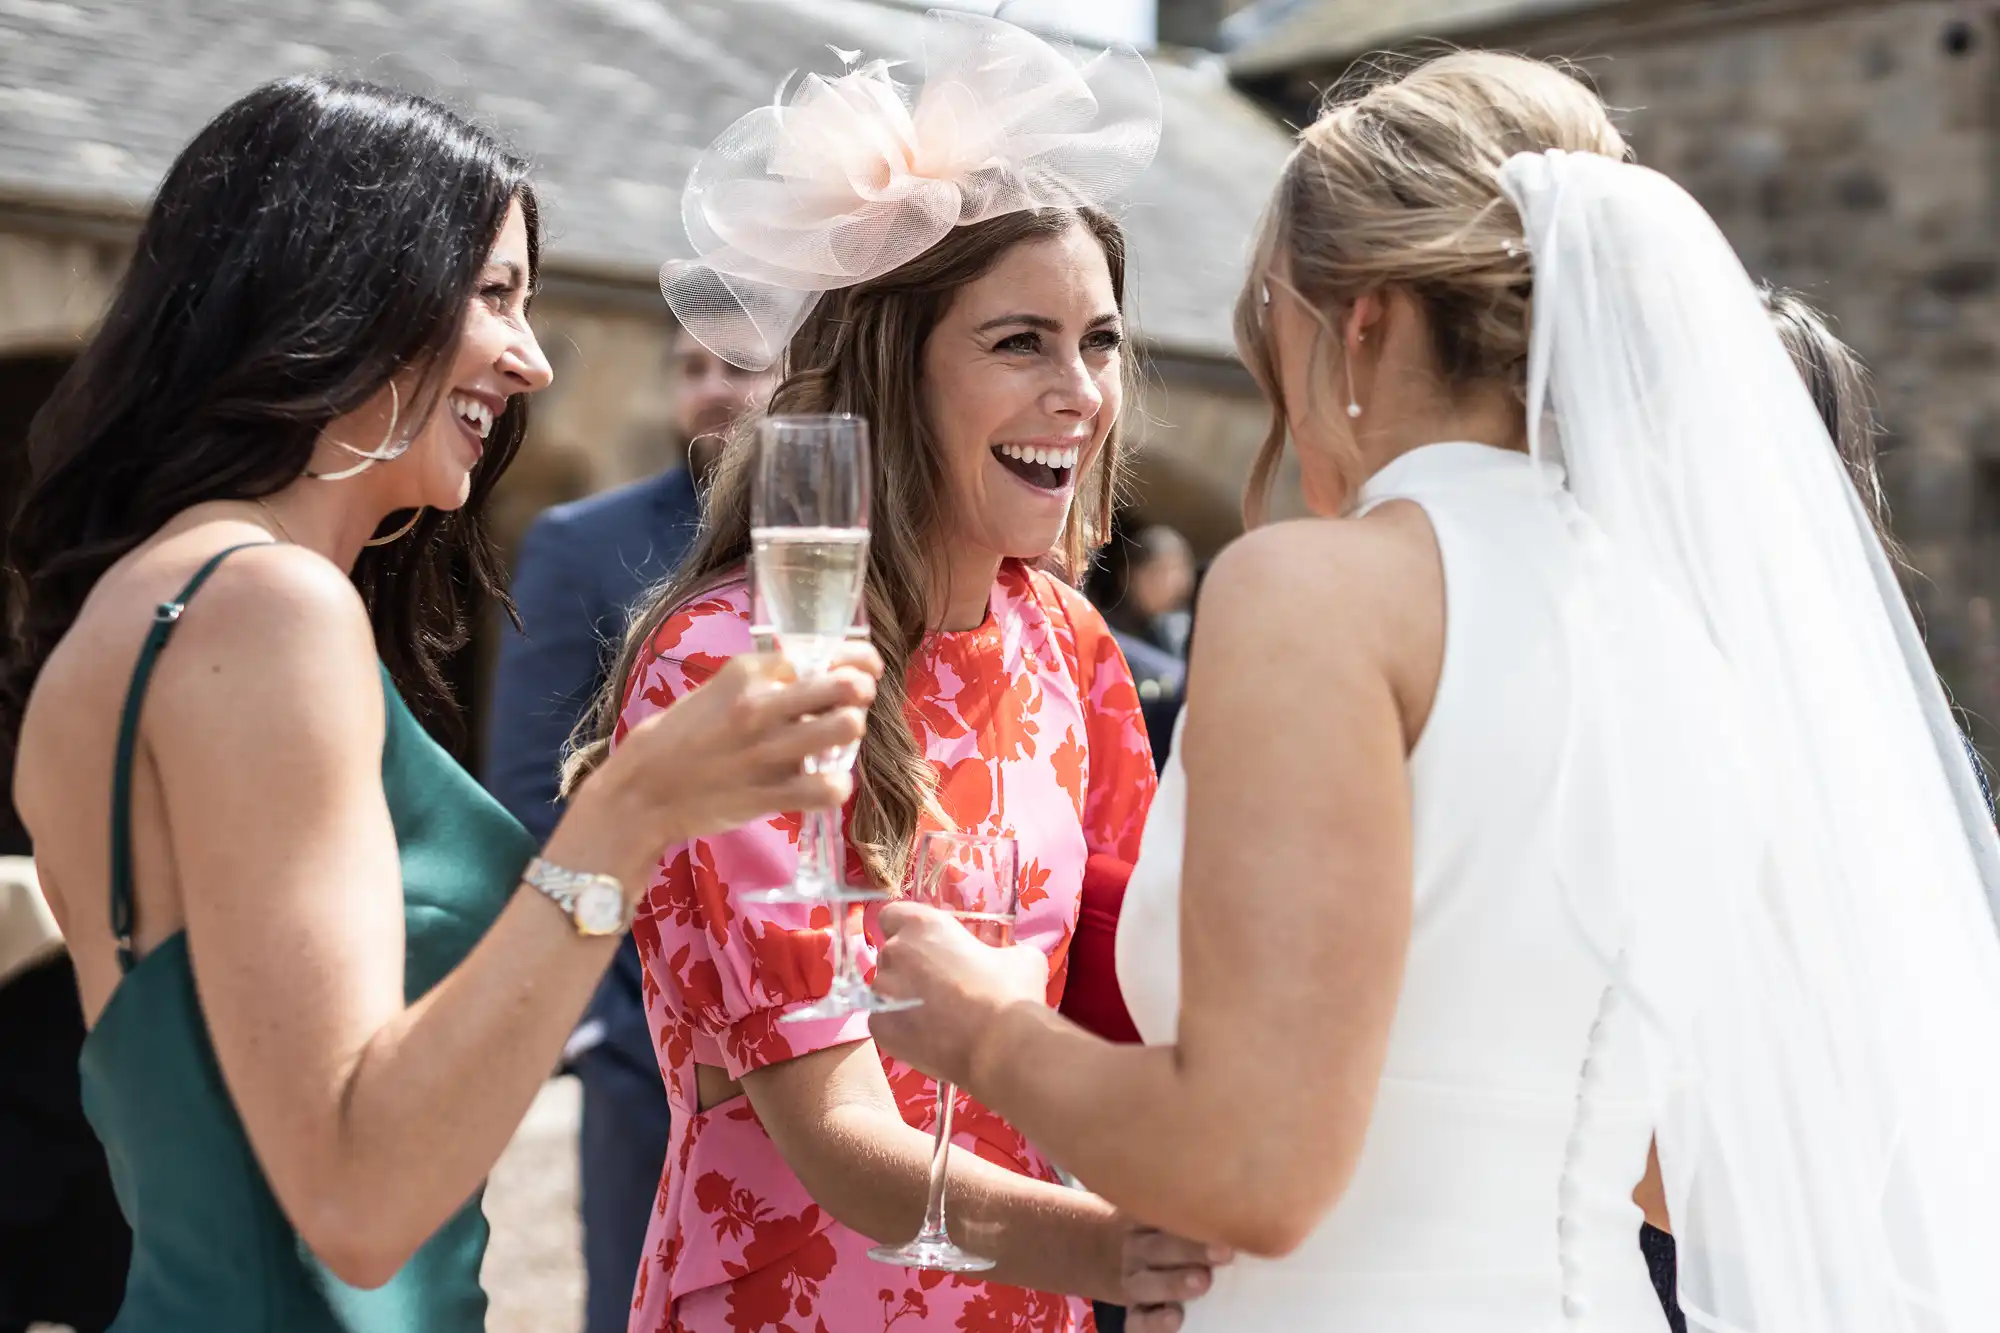 Three women laughing and conversing at a wedding; two guests in dresses holding champagne glasses and the bride in a white gown.